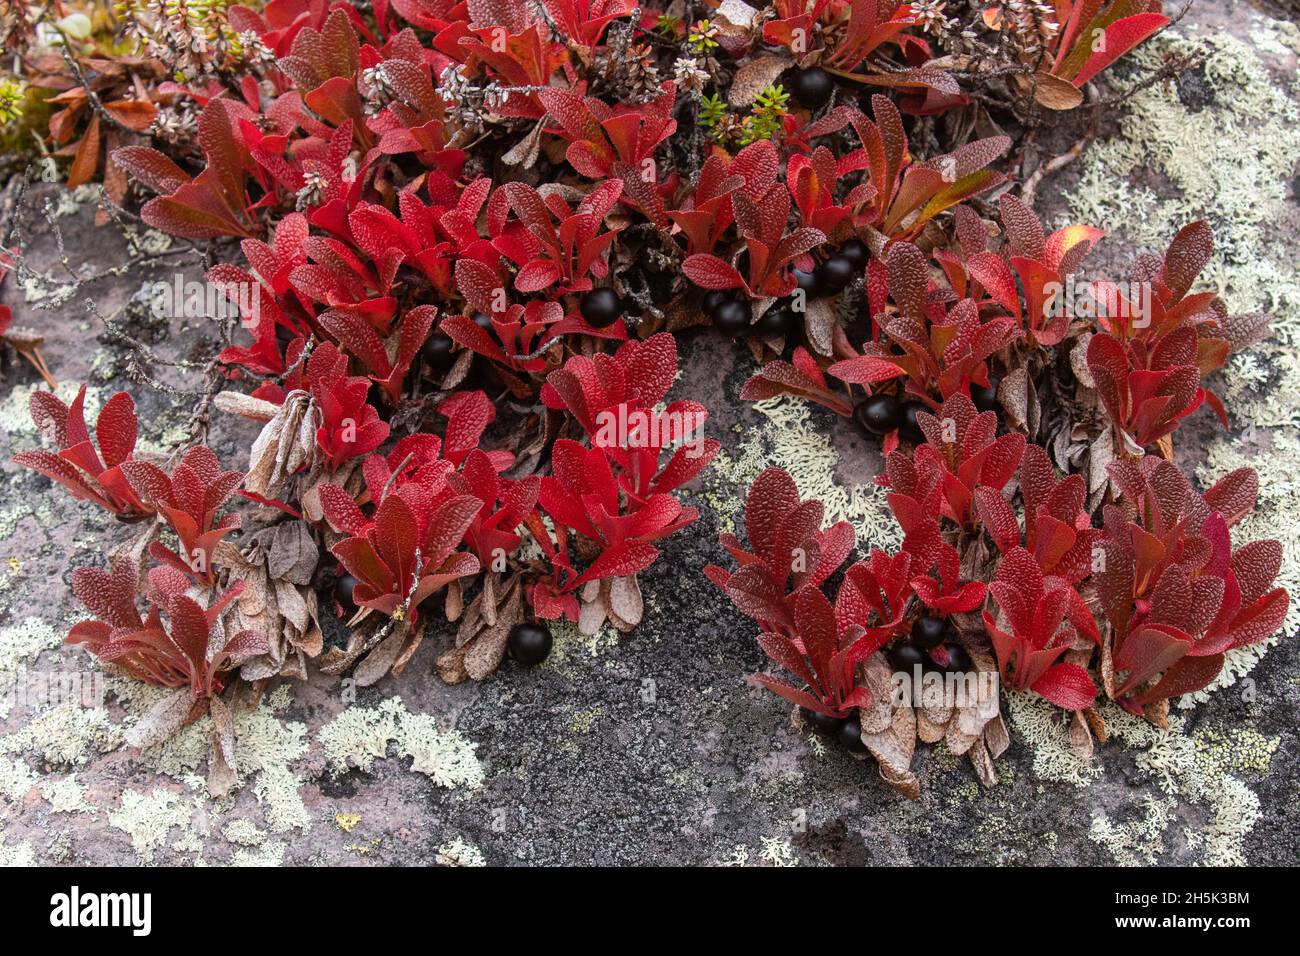 Vibrant red Alpine bearberry, Arctous alpina with dark ripe berries during autumn foliage in Finnish Lapland, Northern Europe. Stock Photo